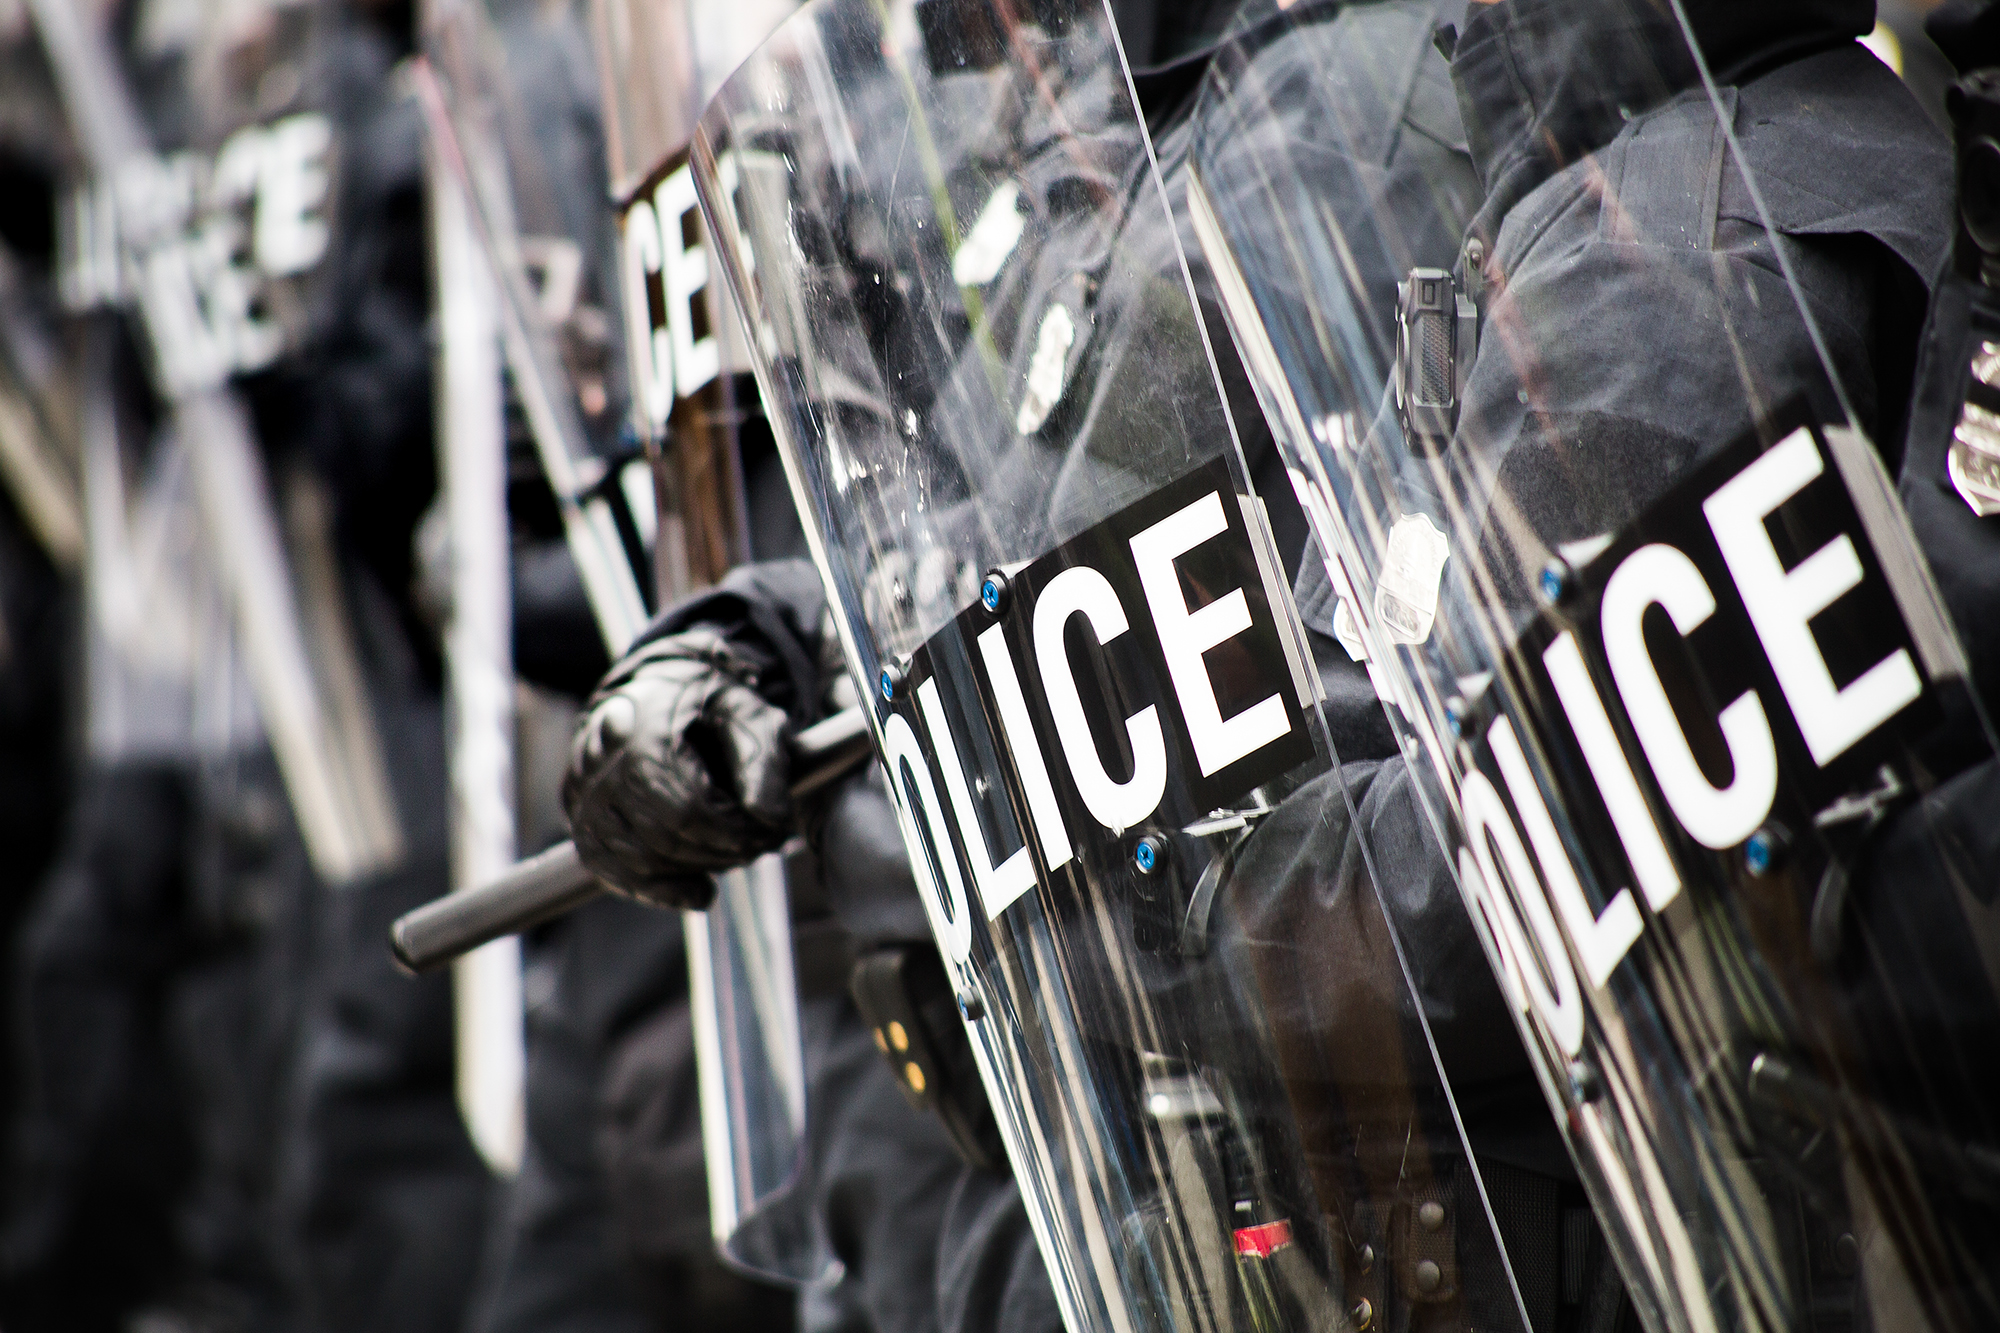  Police came out in riot gear in Washington DC after mass protests on the streets after the 2016 inauguration of President Donald Tump.  